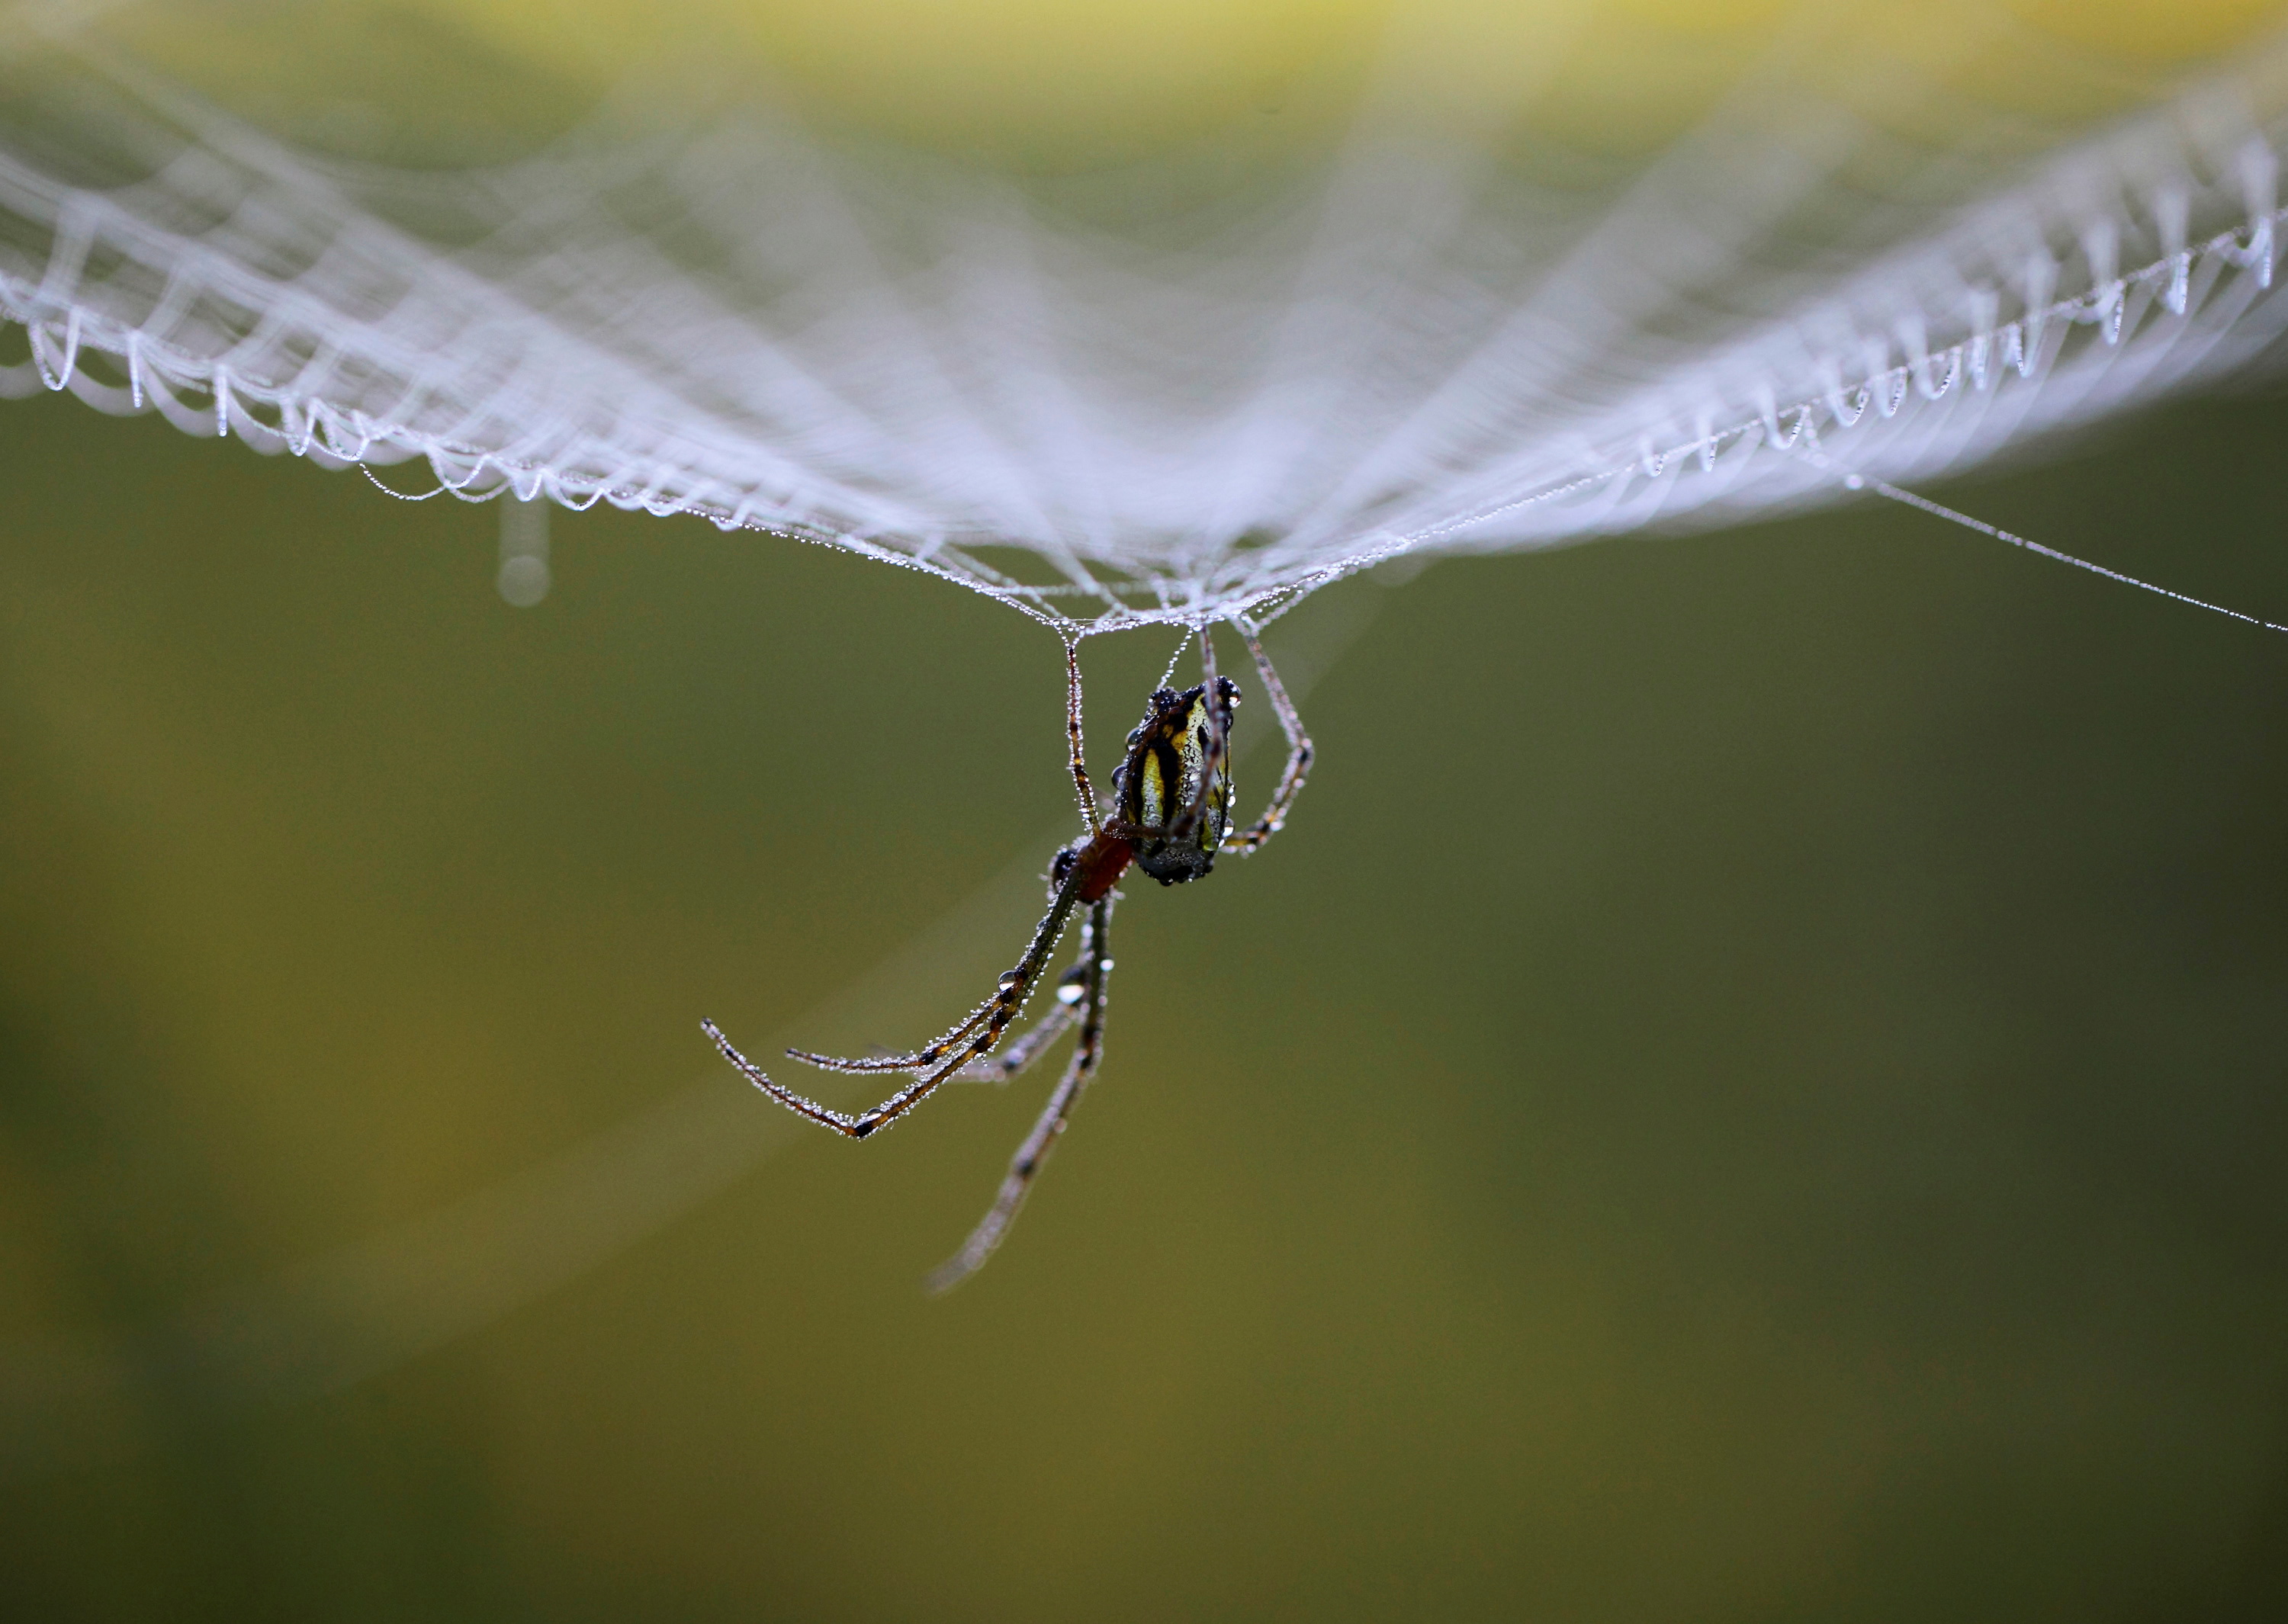 Dewdrops gather on a spider as it rests on its web in the early morning in Lalitpur, Nepa